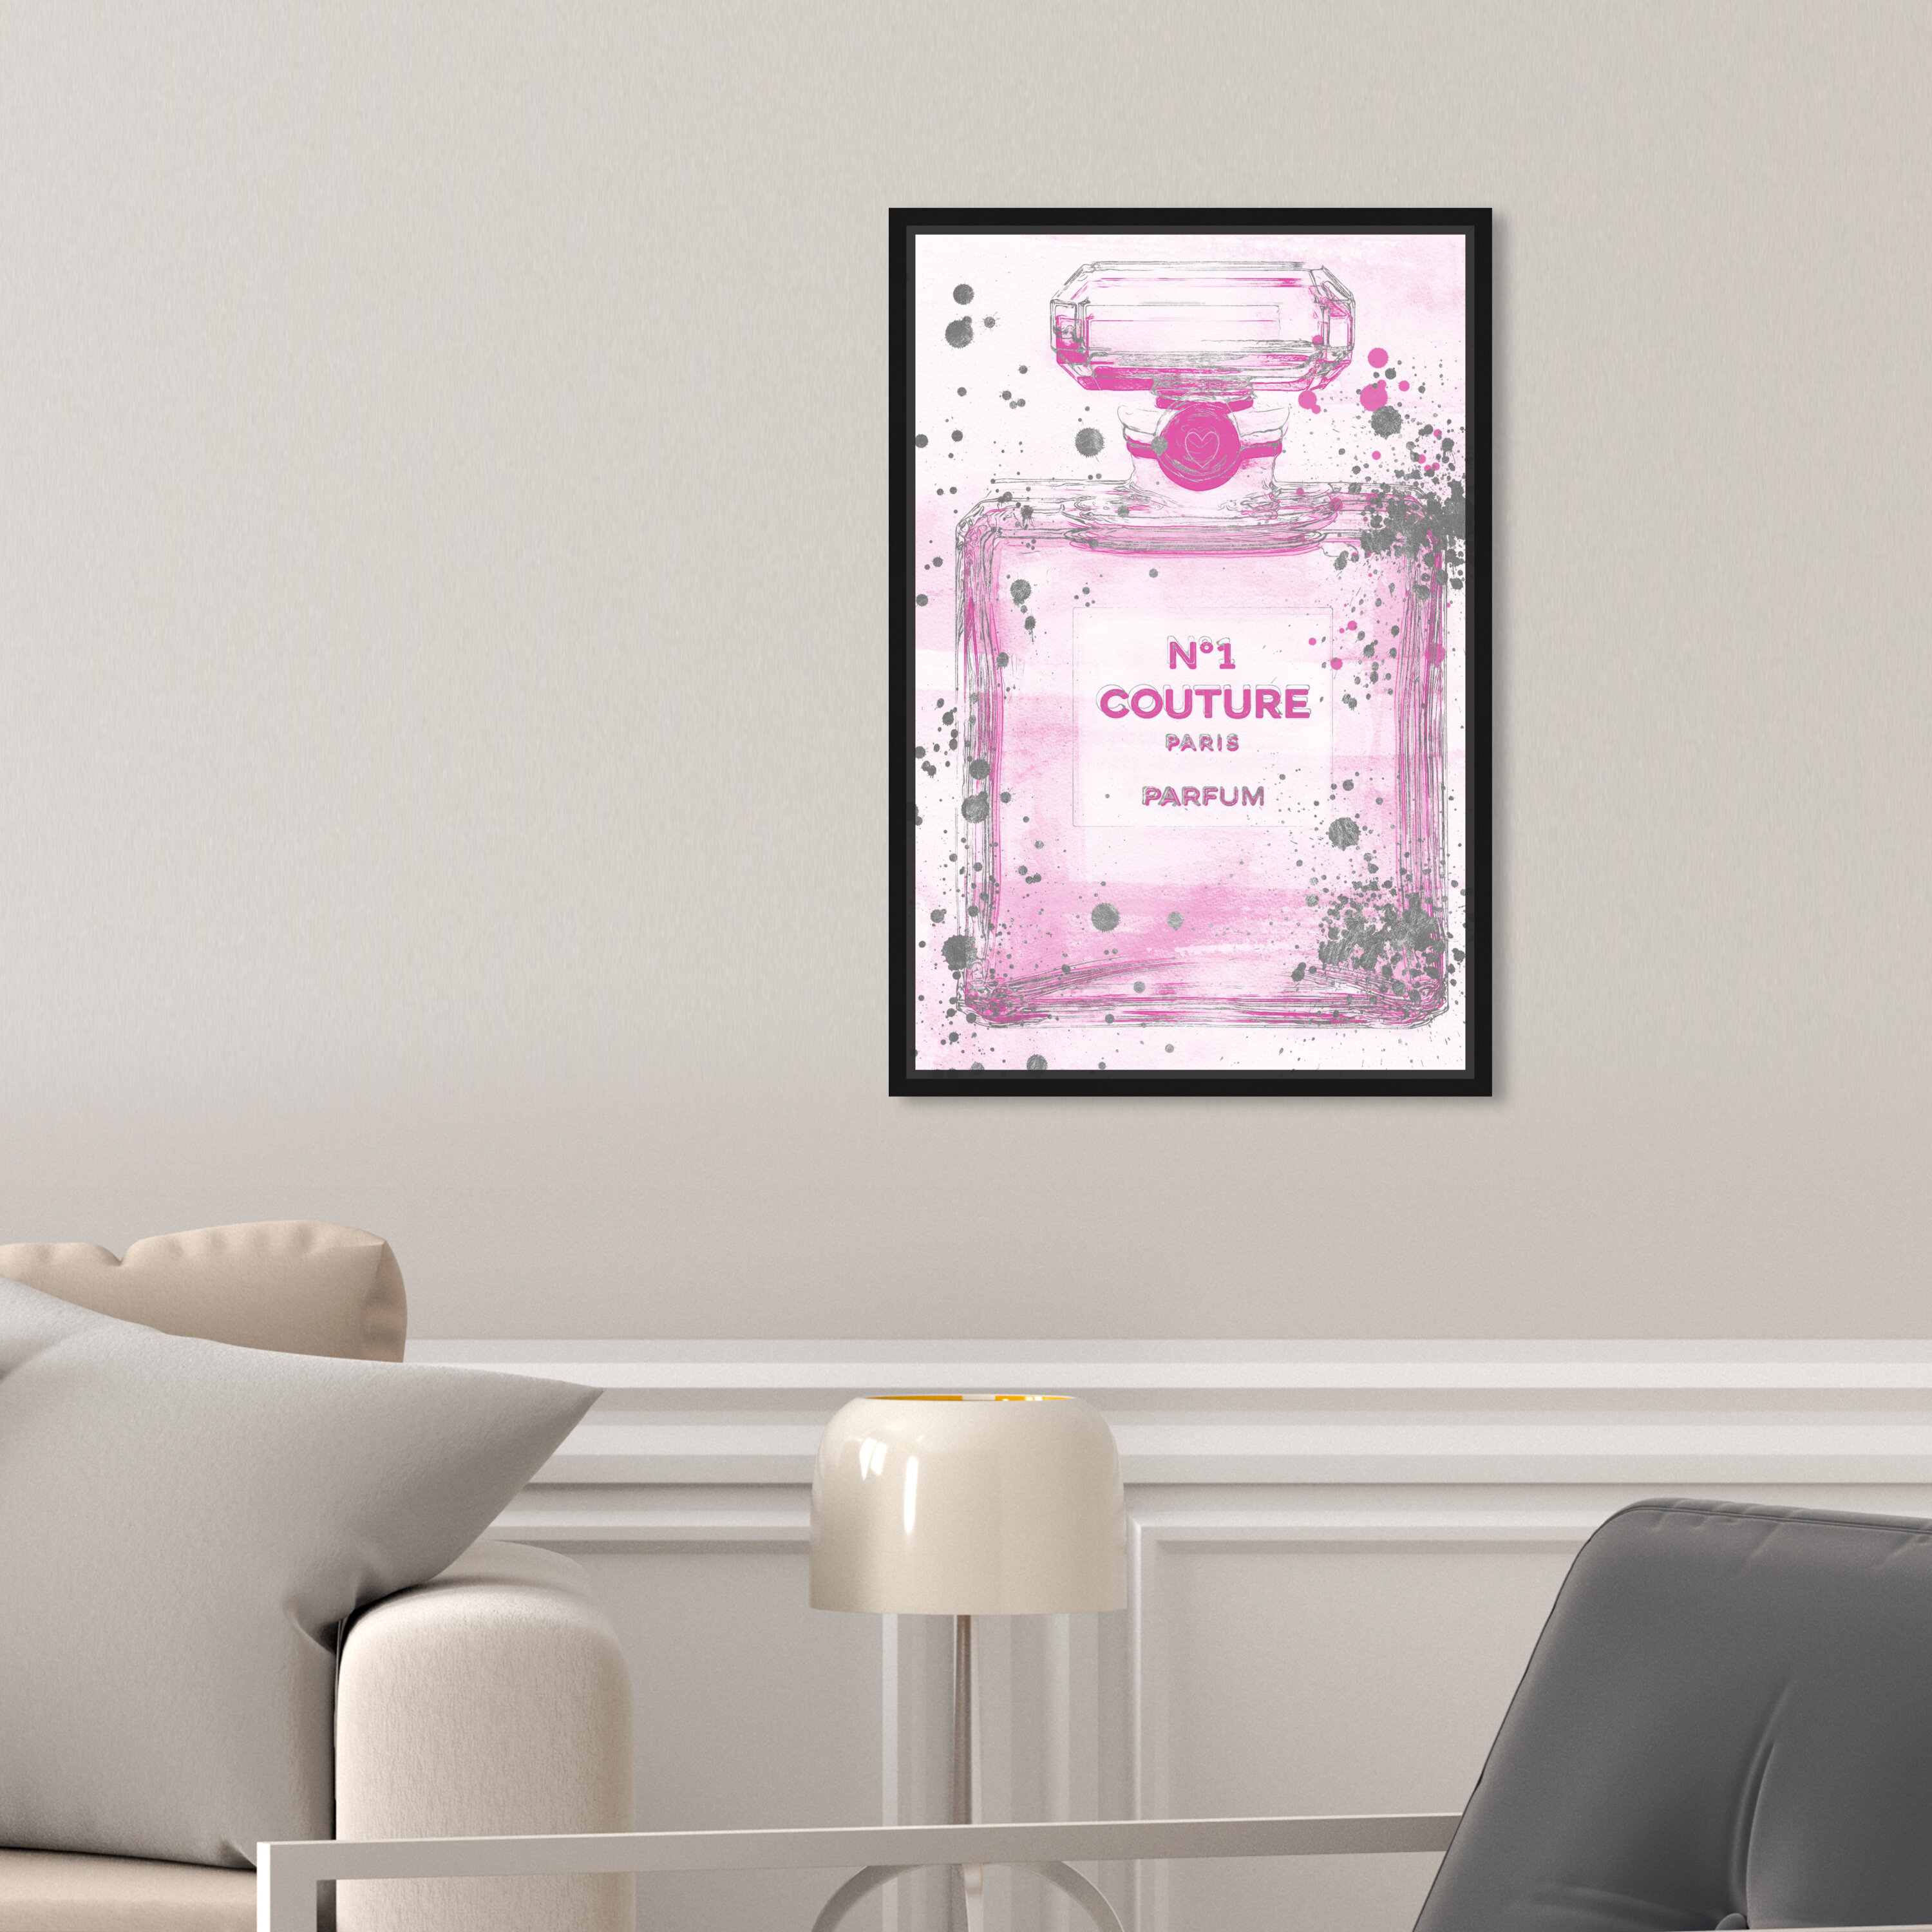 Oliver Gal 'Couture Pink Parfum' Fashion and Glam Wall Art Framed Canvas Print Perfumes - Pink, Gray - 10 x 15 - Black